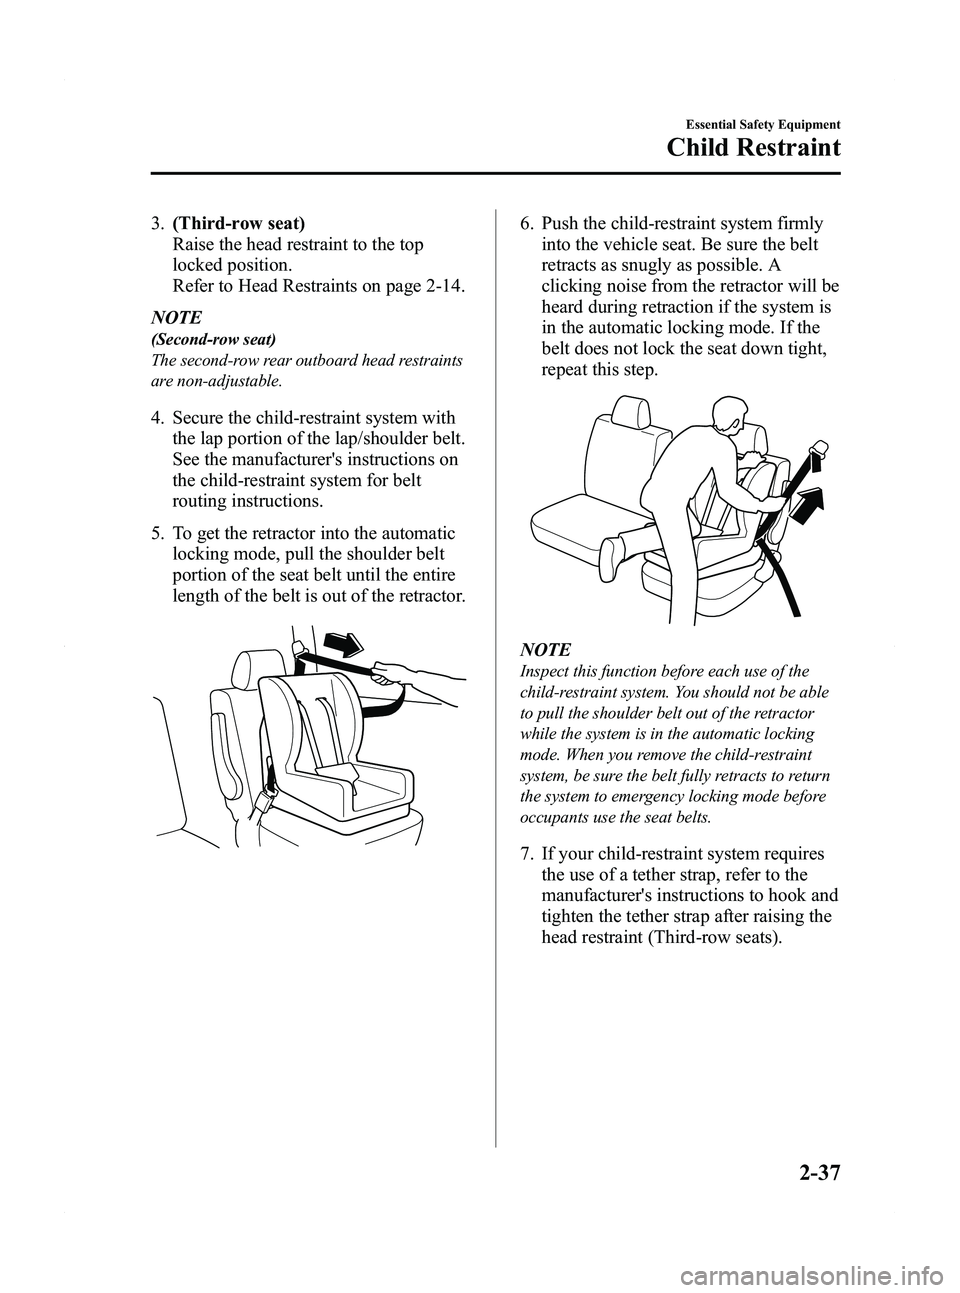 MAZDA MODEL 5 2012  Owners Manual Black plate (49,1)
3.(Third-row seat)
Raise the head restraint to the top
locked position.
Refer to Head Restraints on page 2-14.
NOTE
(Second-row seat)
The second-row rear outboard head restraints
ar